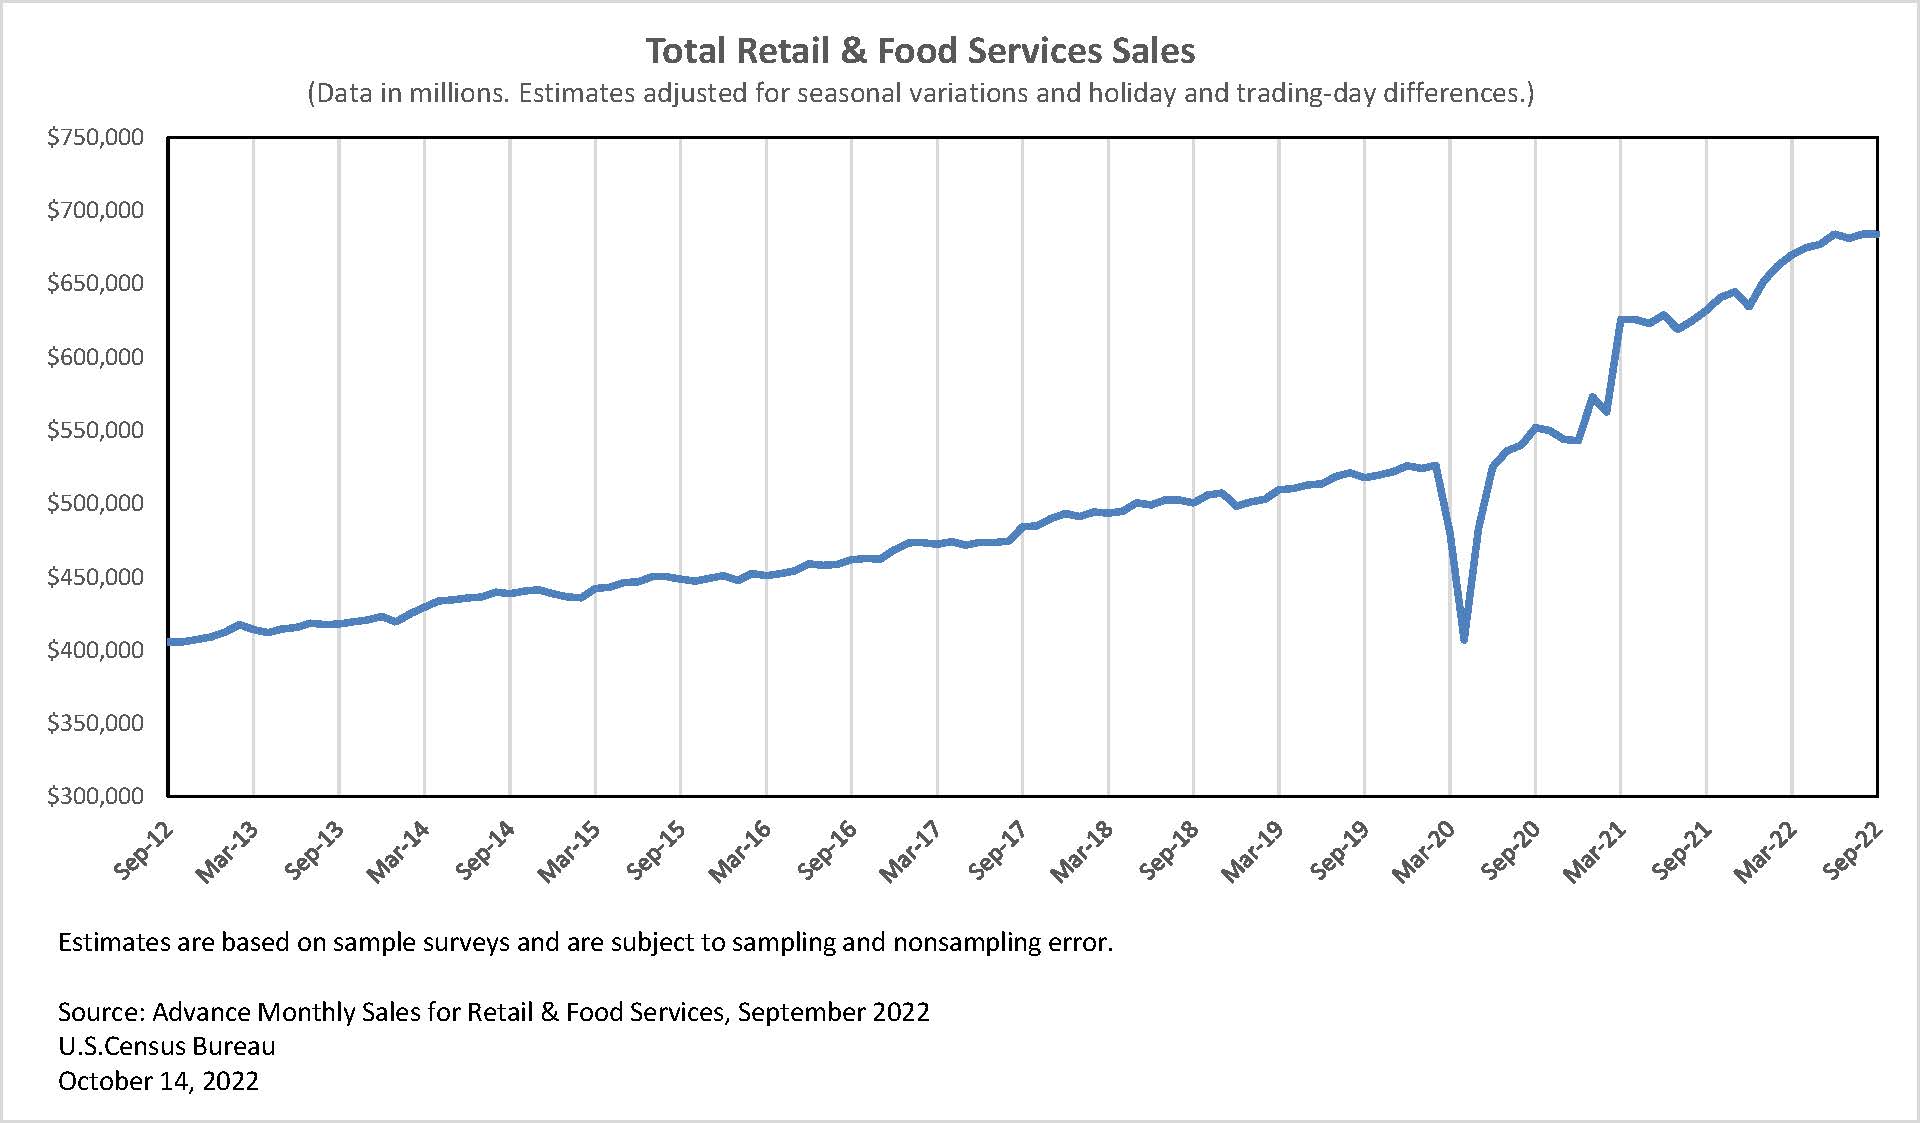 stuiten op Evenement Spruit U.S. Census Bureau on X: "Retail &amp; food services seasonally adjusted  sales were $684.0b in September 2022, virtually unchanged from August 2022,  but up 8.2% from September 2021. https://t.co/omdyUAbyVN #CensusEconData  #RetailSales https://t.co ...